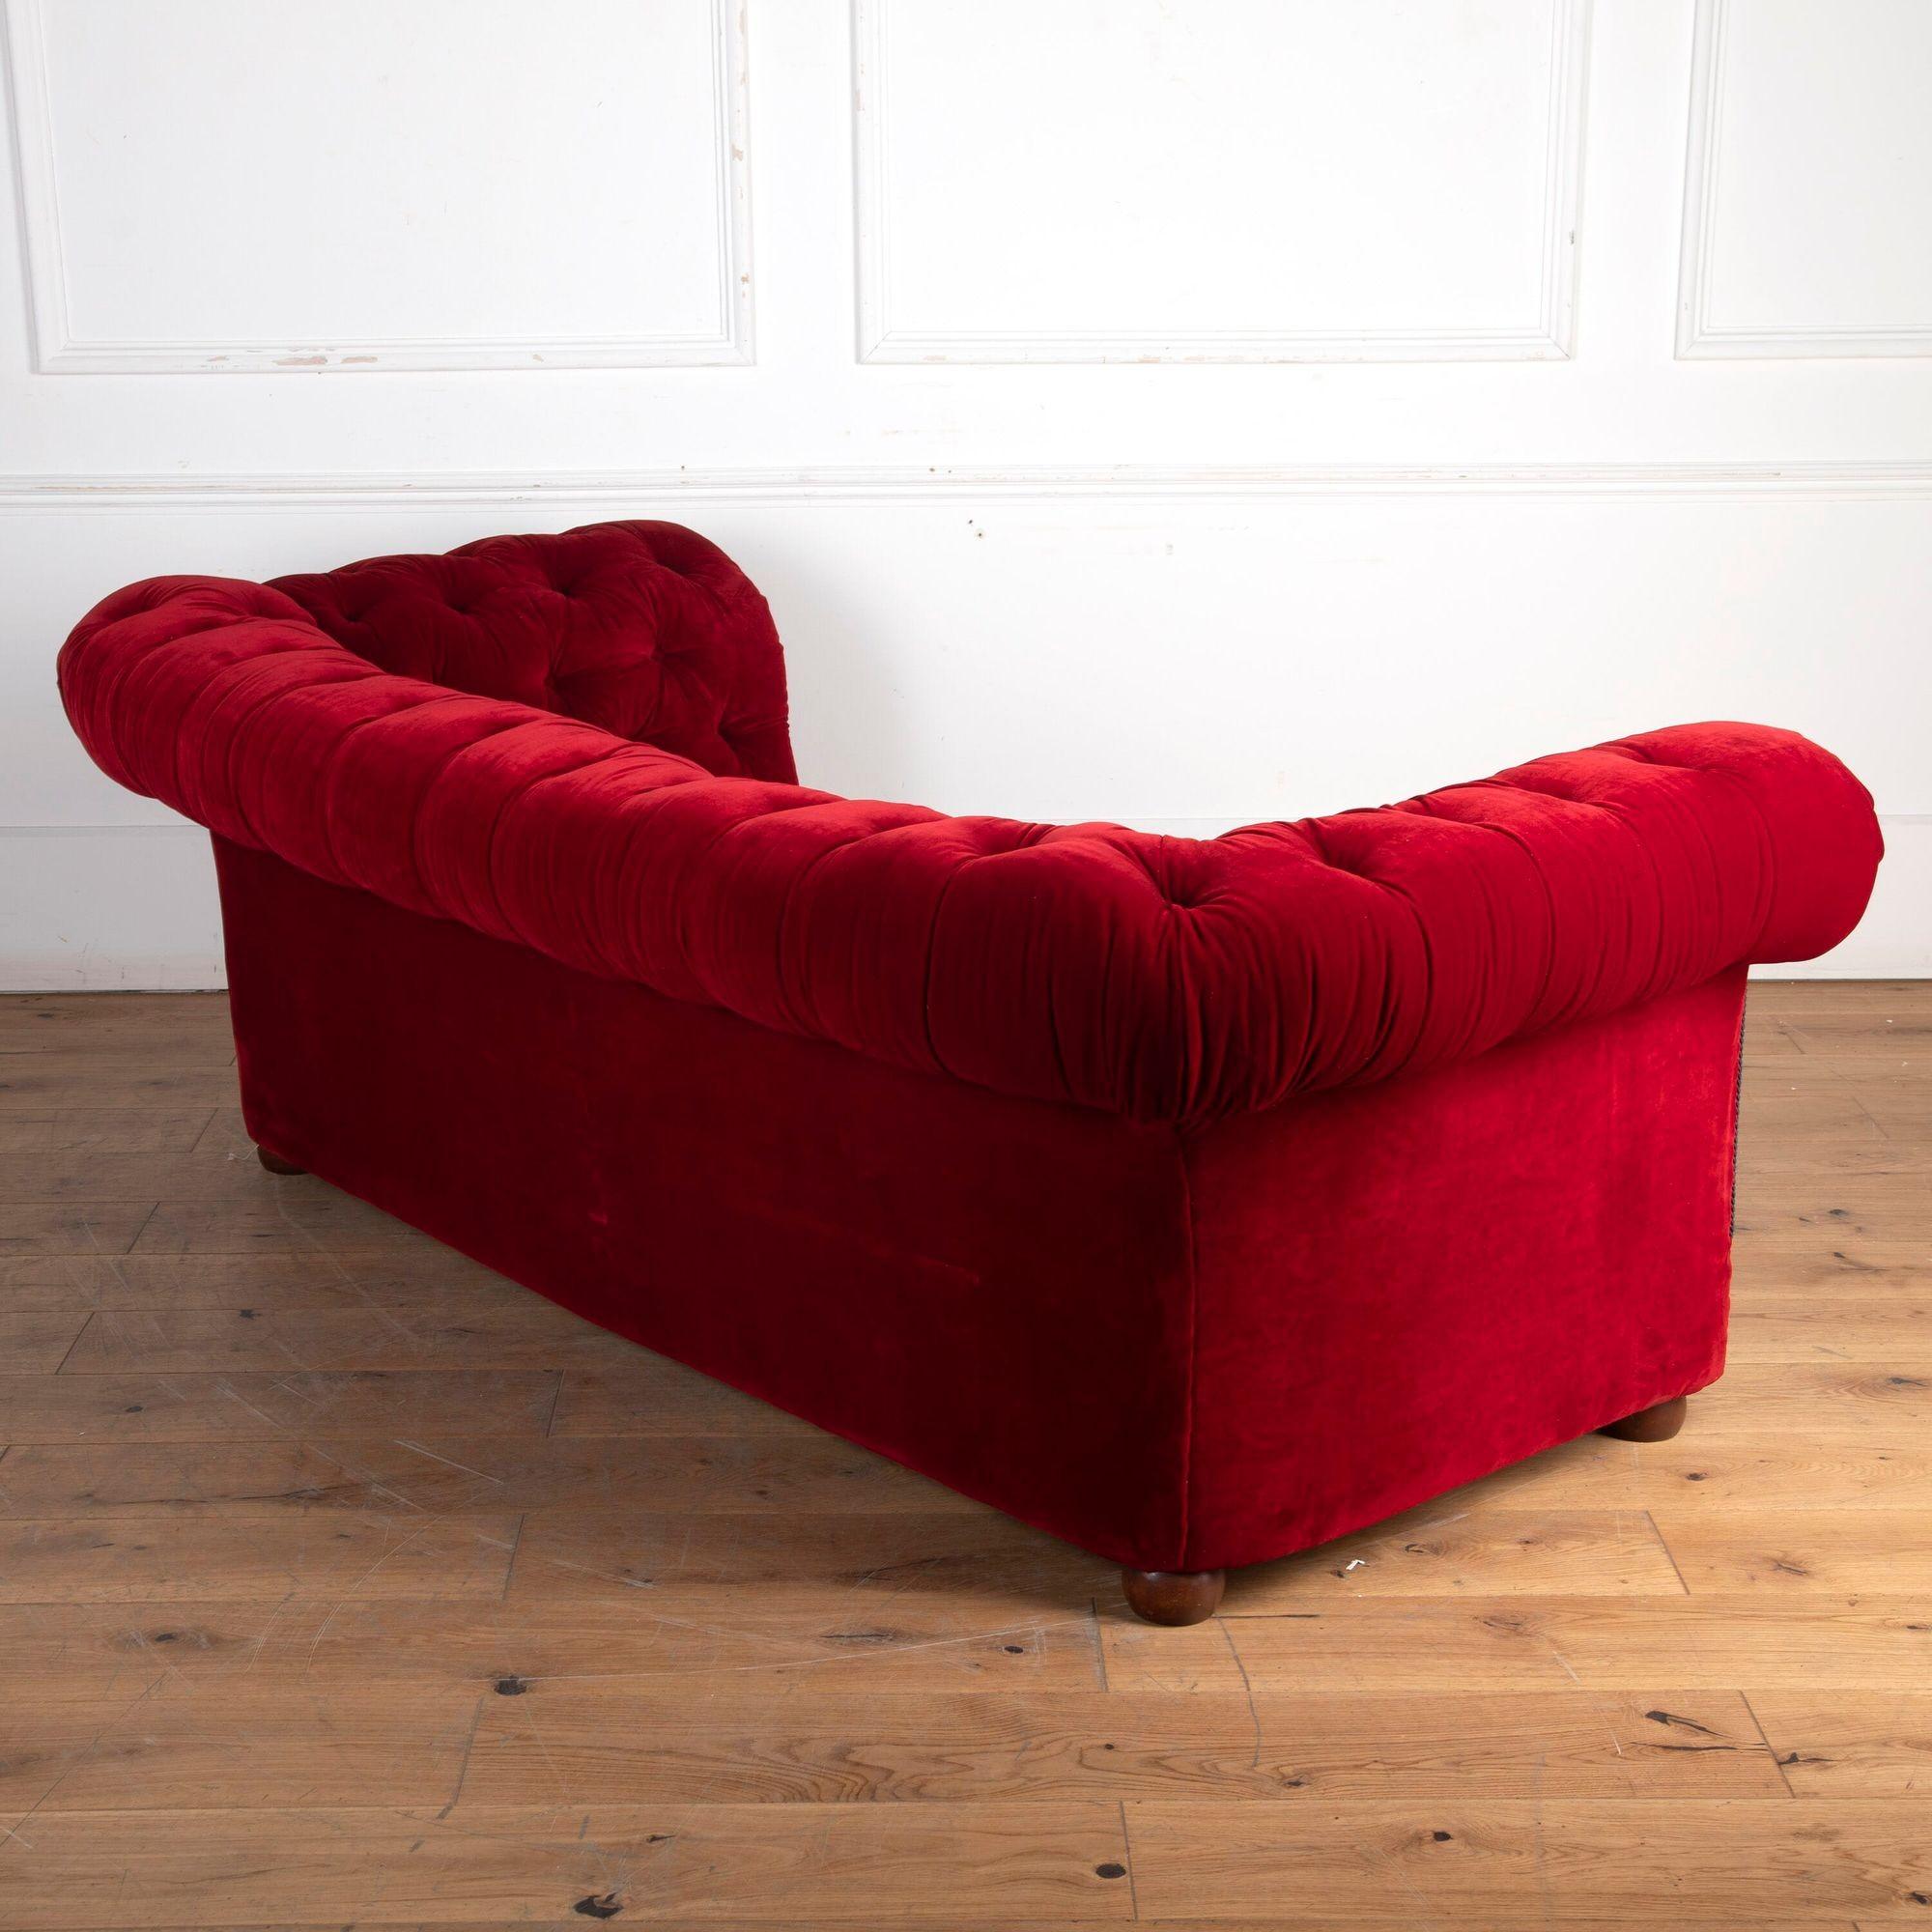 Stunning 19th Century drop-end buttoned red Chesterfield sofa.
Still retaining its original Victorian red velvet fabric which is in remarkable condition for its age.
Within today's home, this would make for a striking addition to any setting!